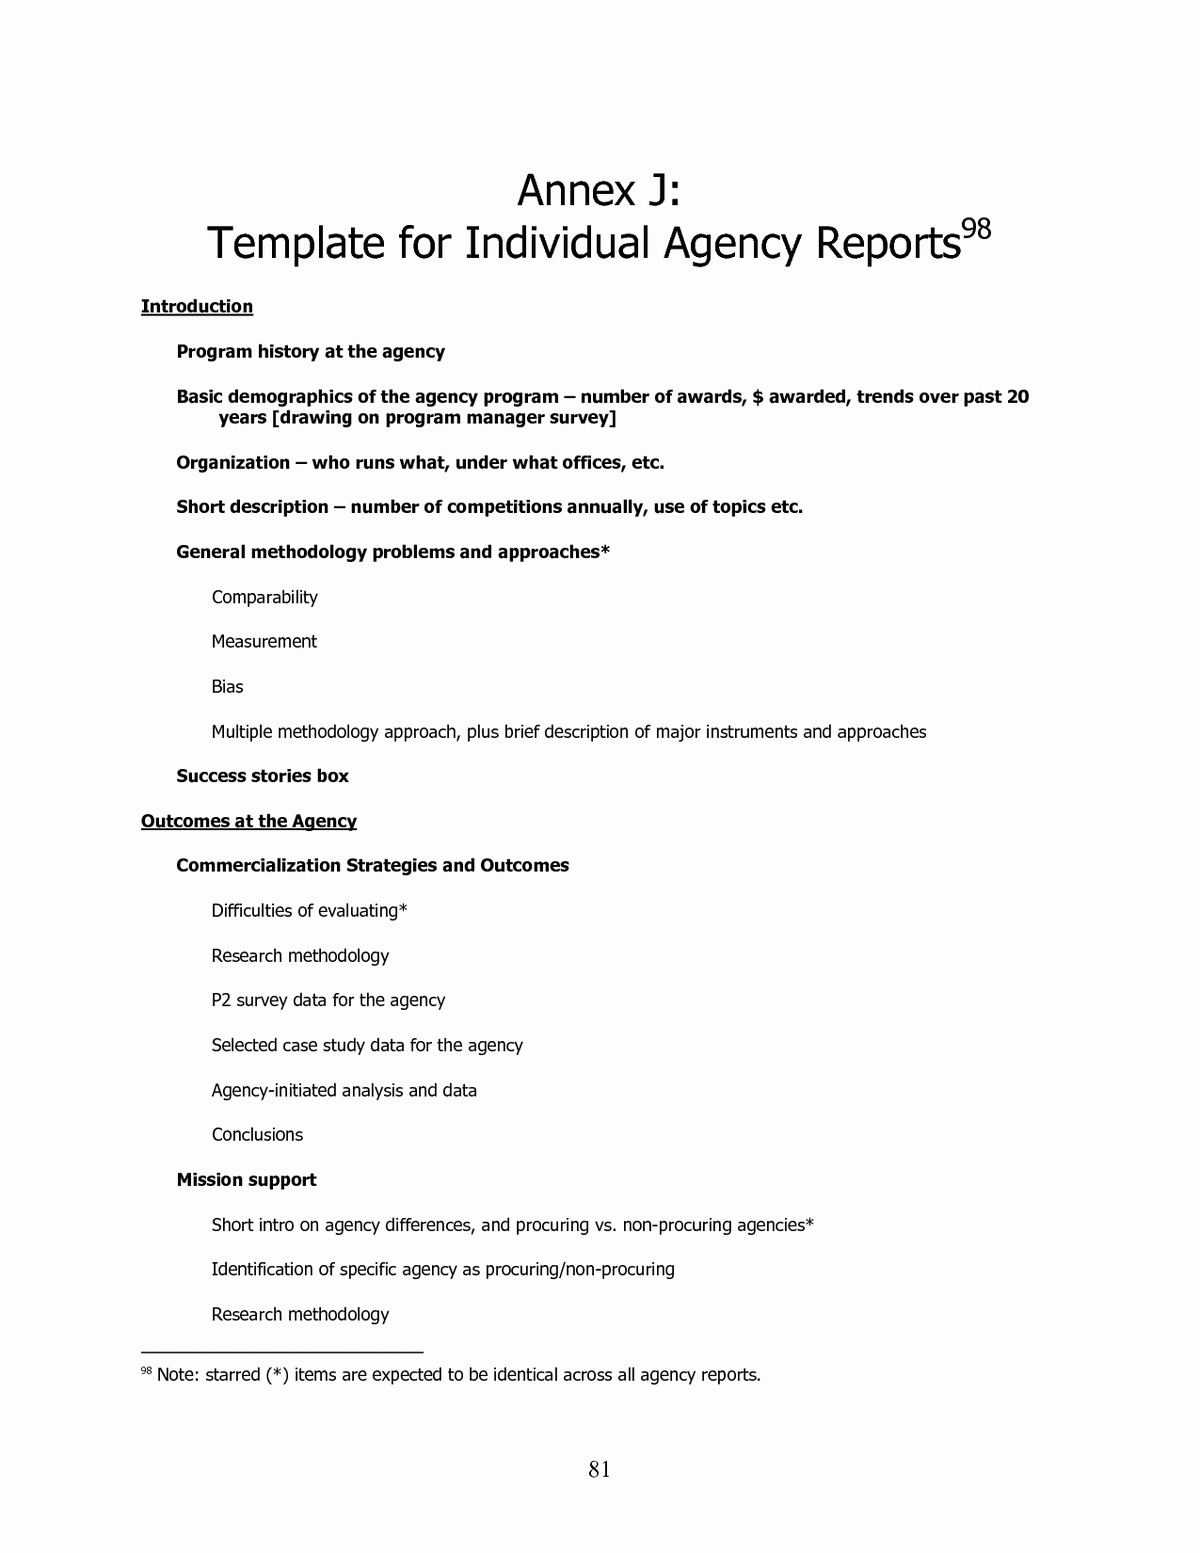 Annex J Template For Individual Agency Reports | An Within Research Project Report Template